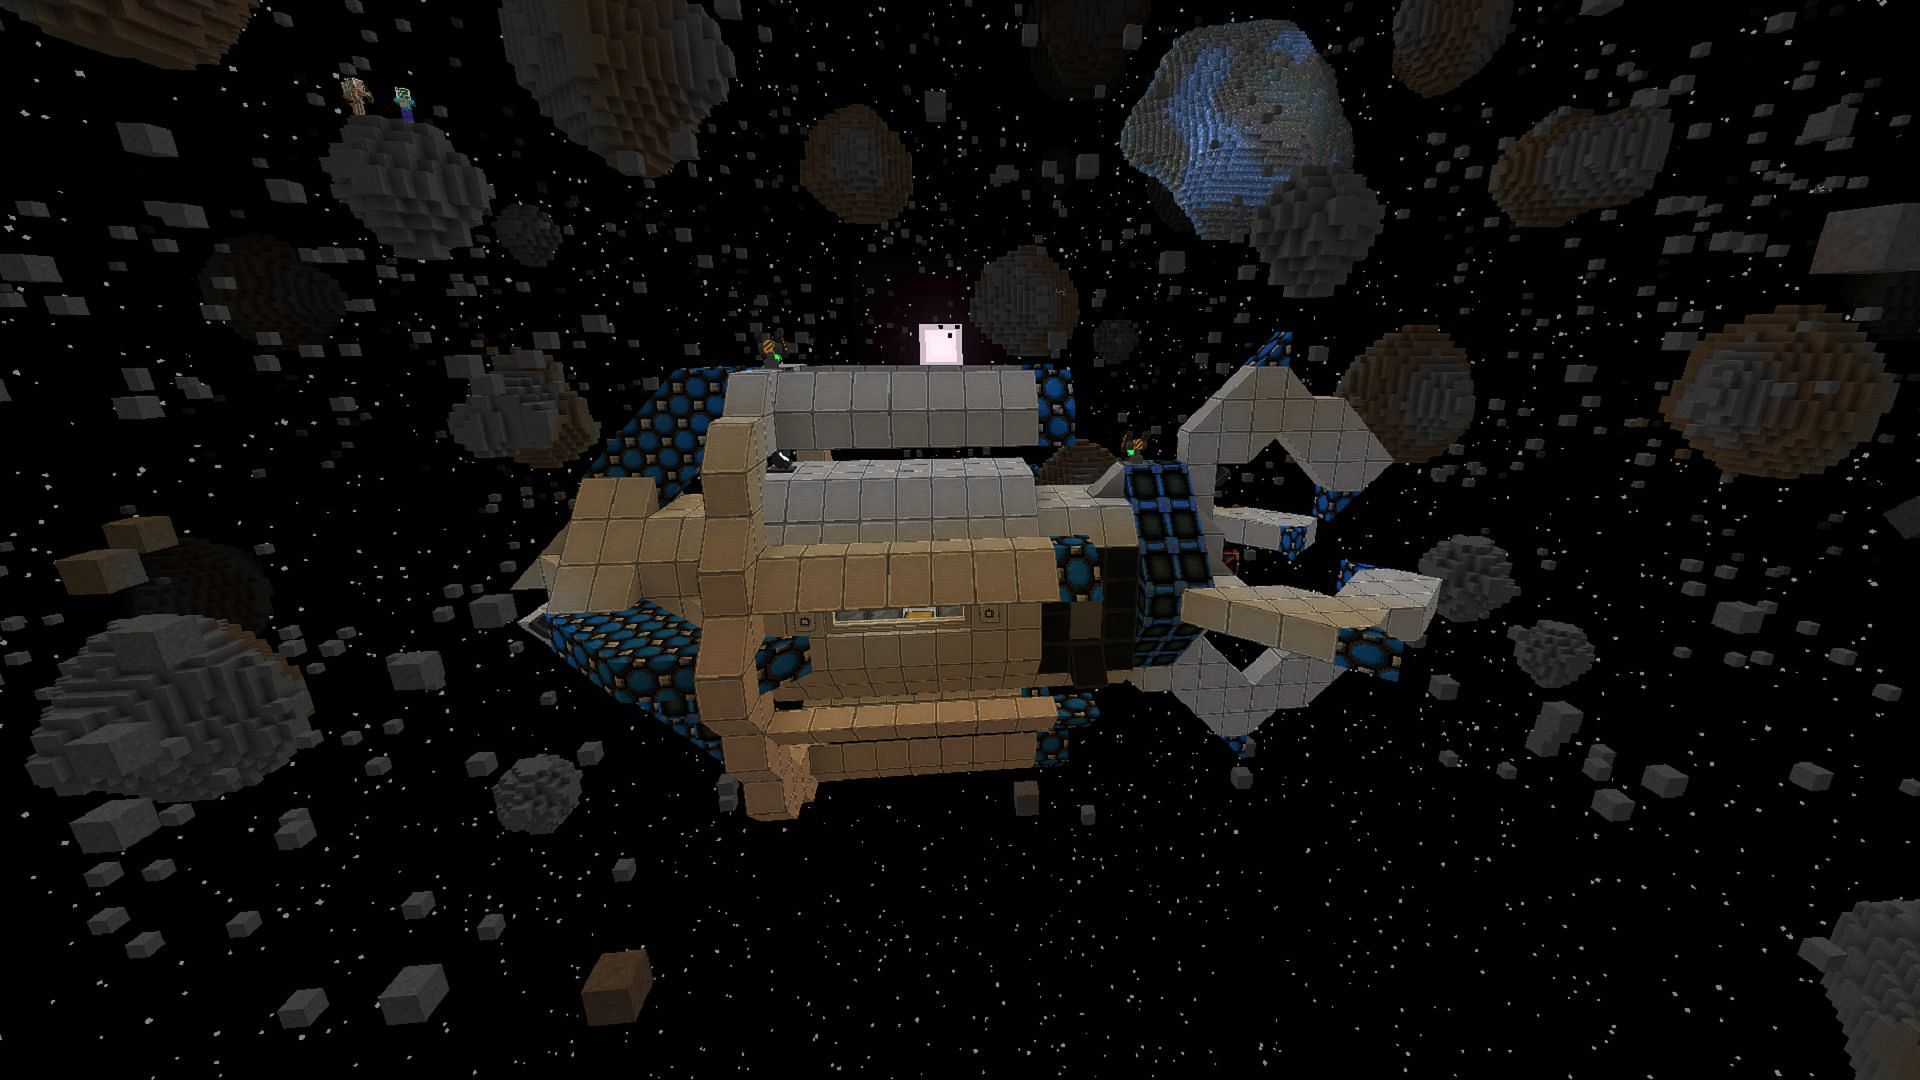 Astroblock places Minecraft players on a quest to return to Earth (Image via Knoxhack/CurseForge)